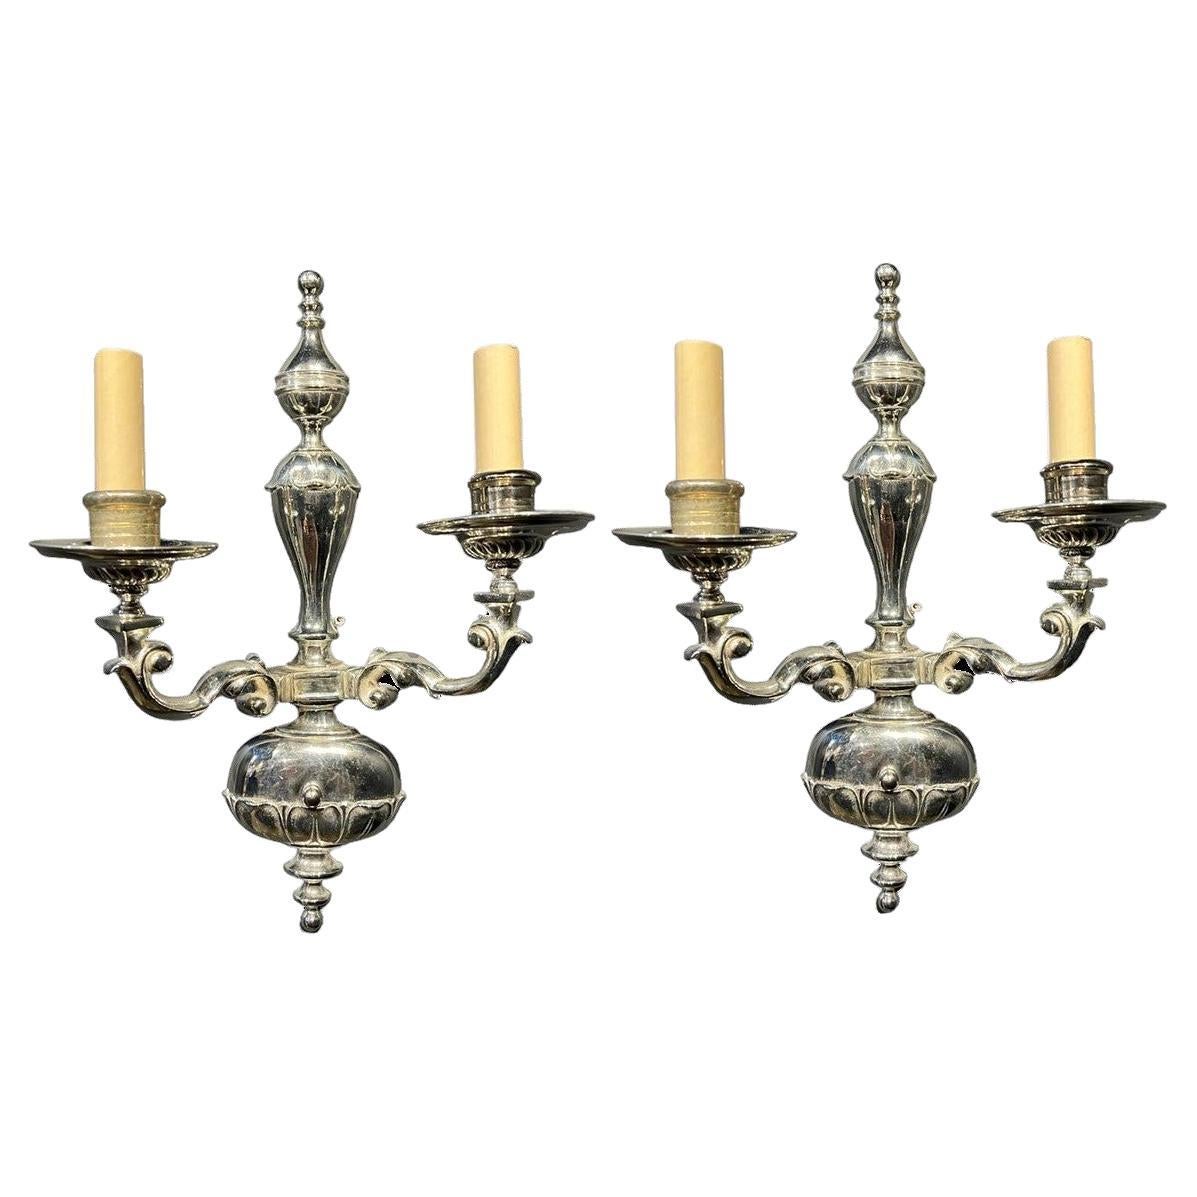 1920's Caldwell Silver Plated Double Light Sconces